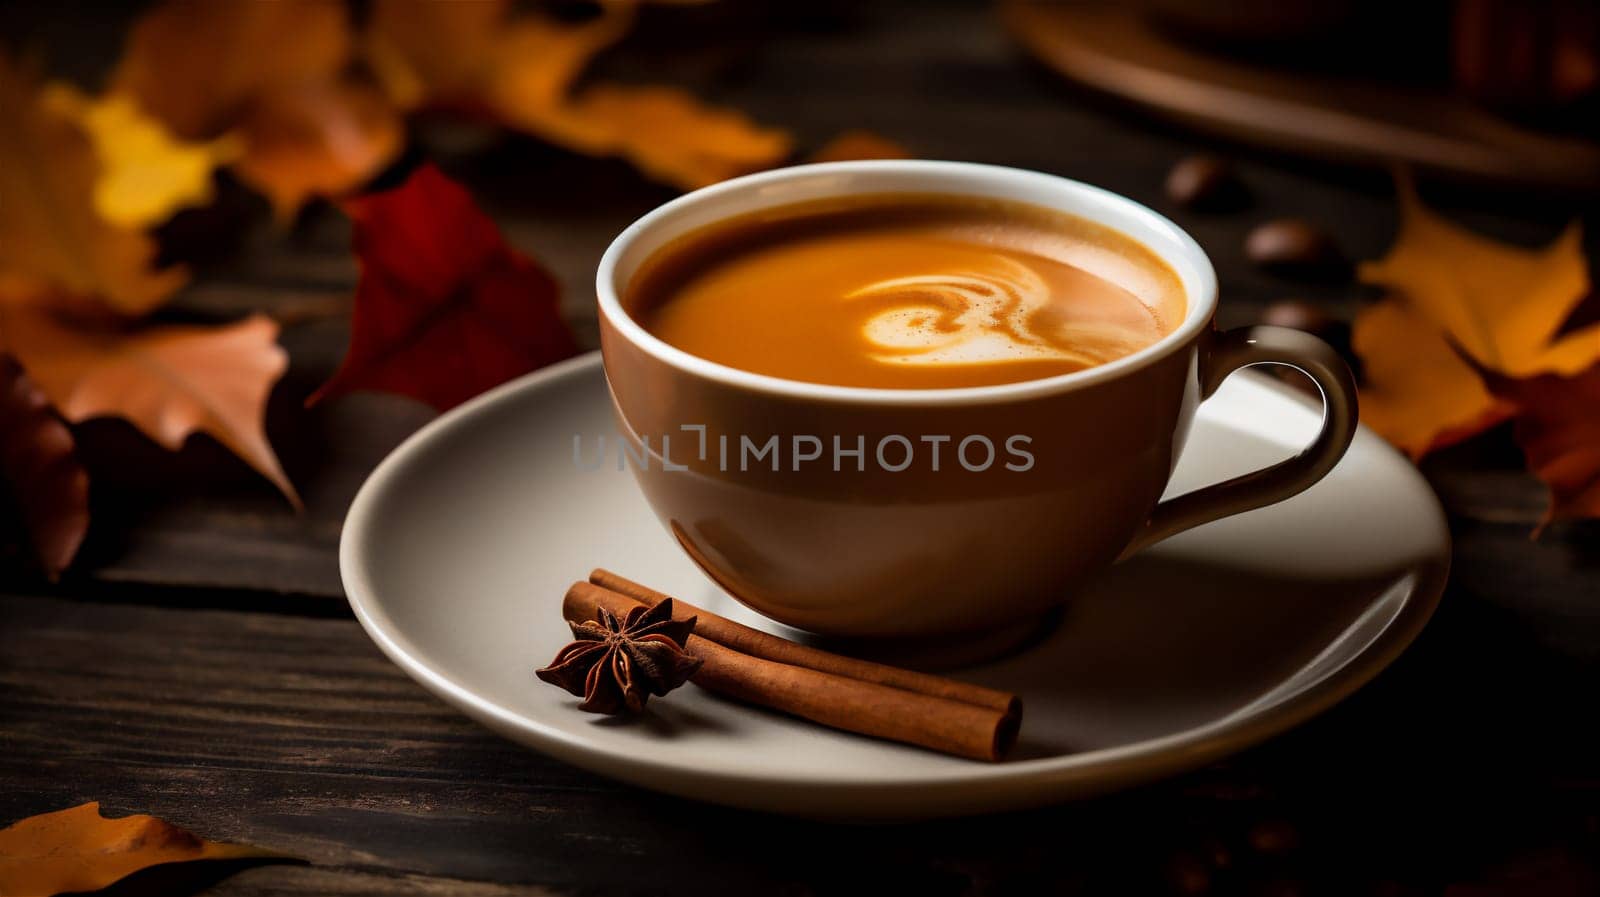 Cup of tasty pumpkin autumn coffee with cinnamon sticks and orange leaves on wooden background. Fall and winter warm drinks concept